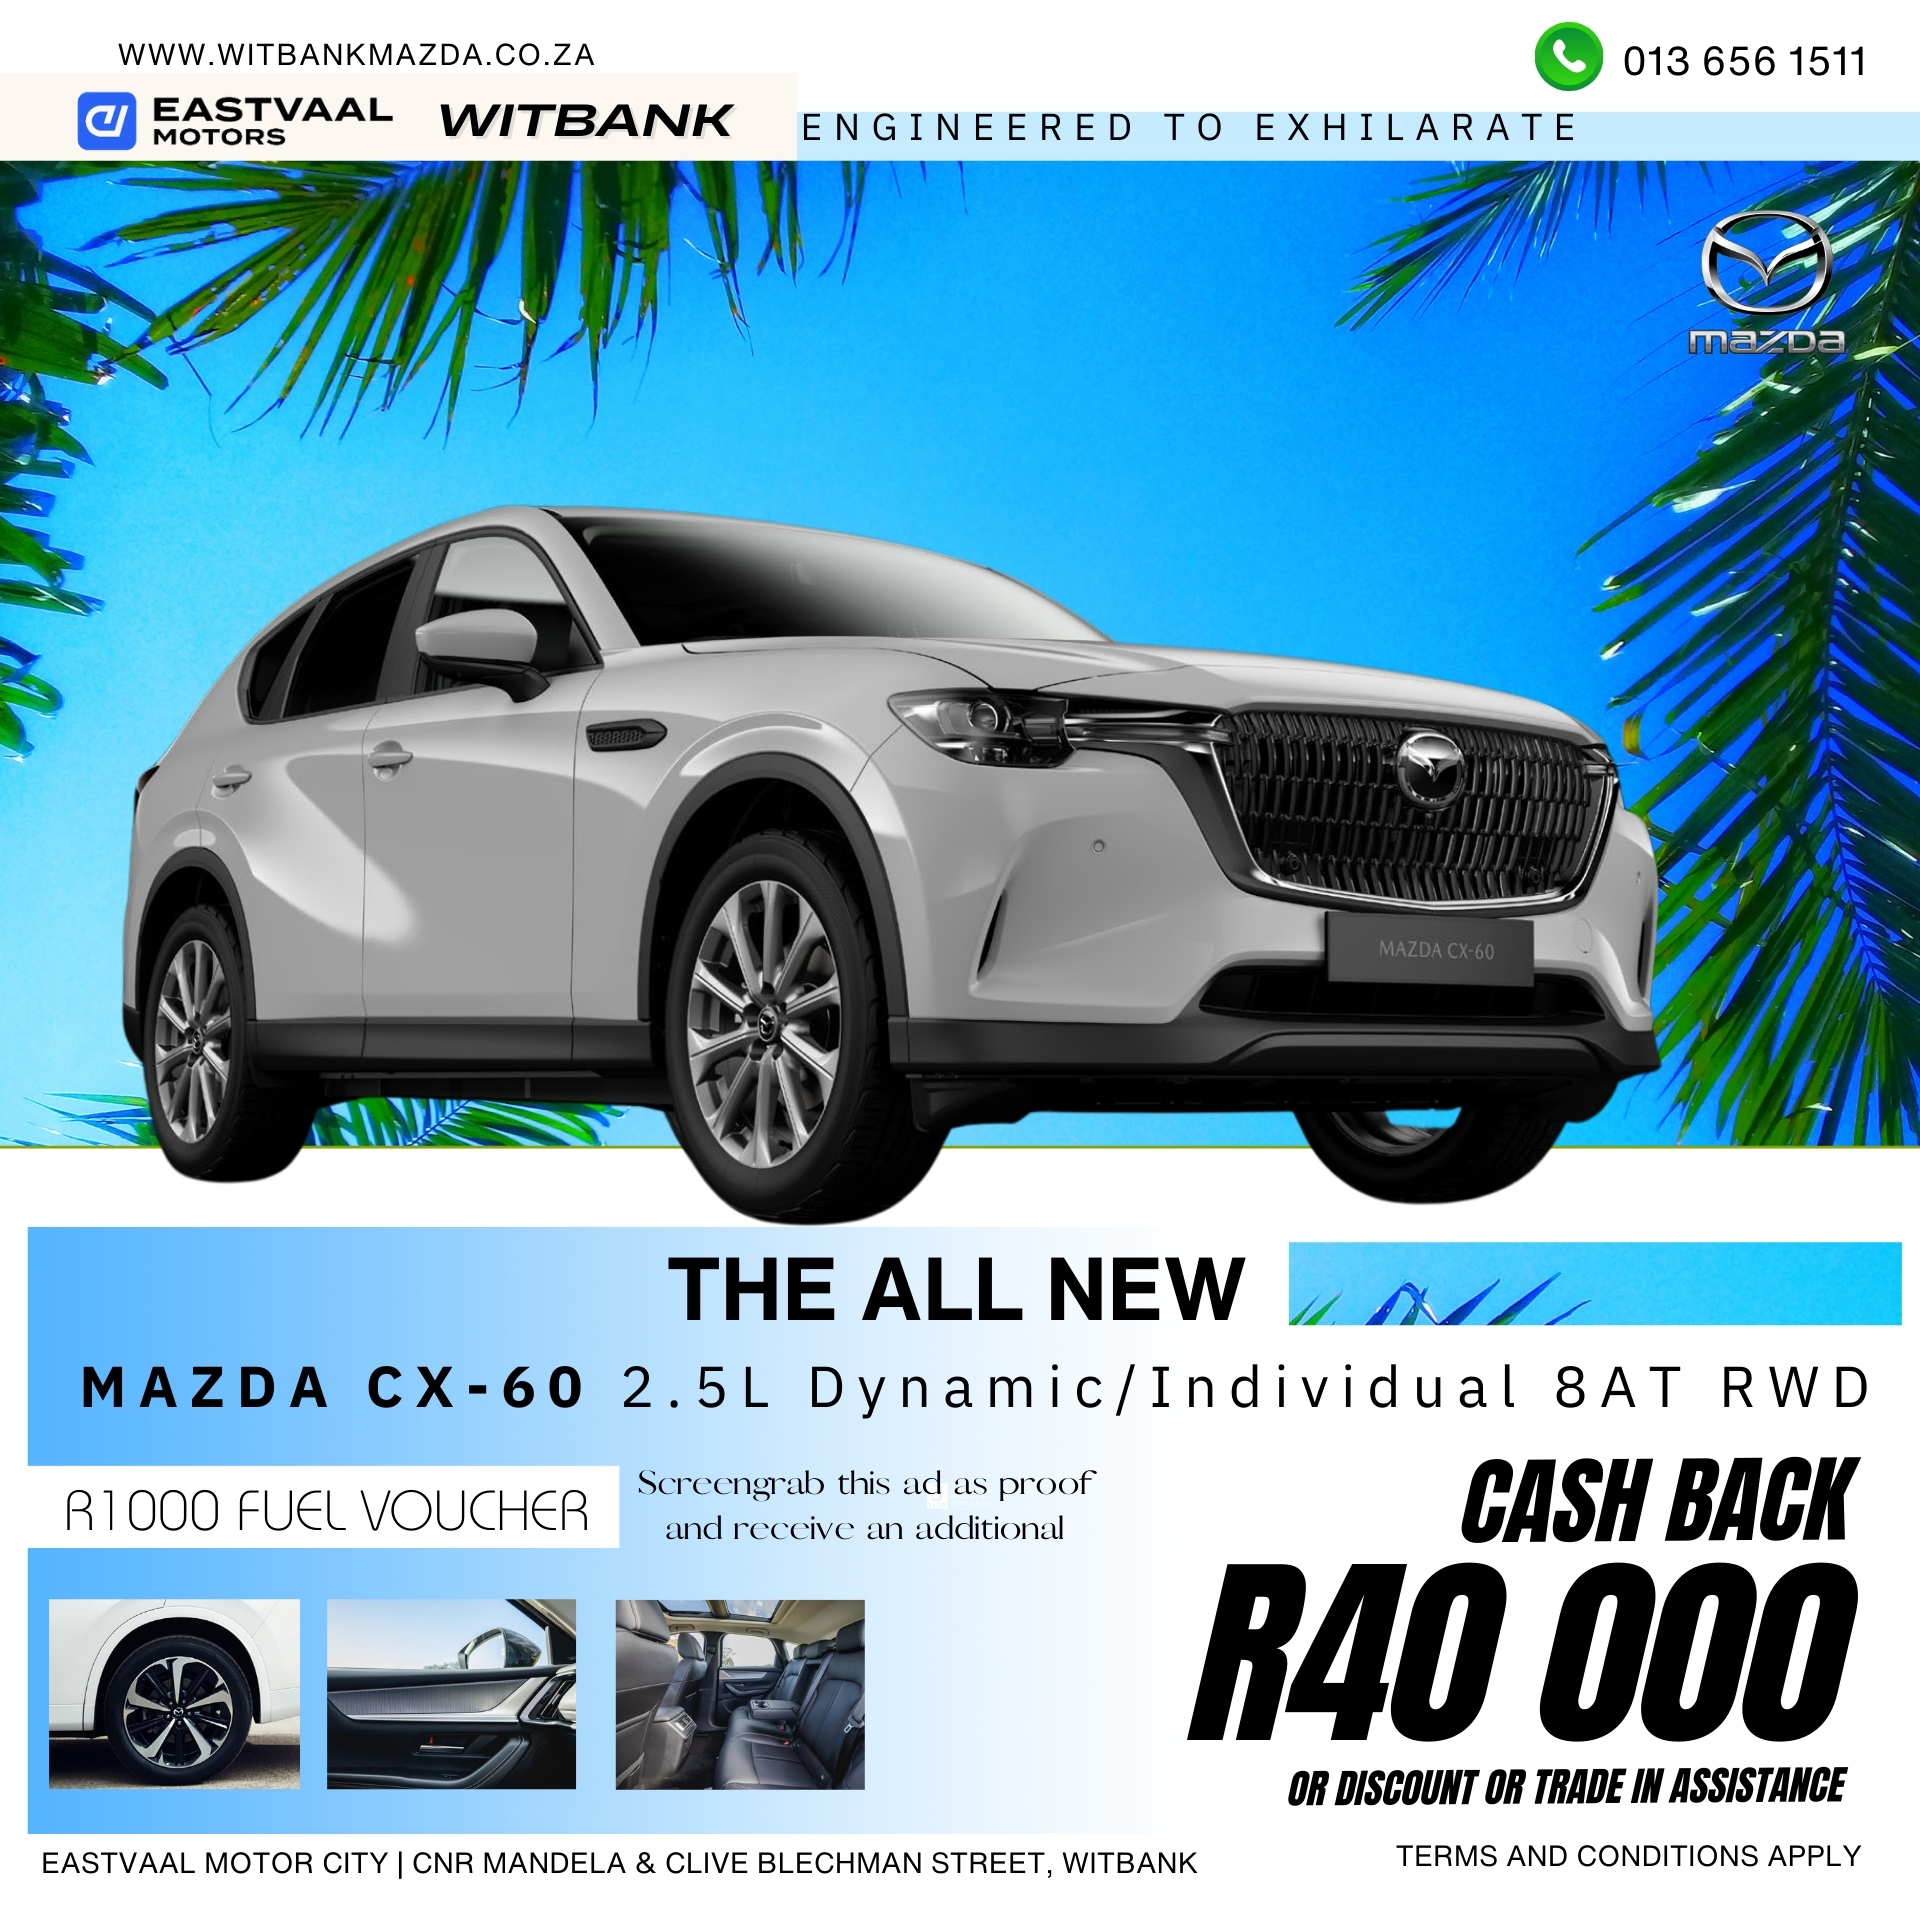 MAZDA CX-60- 2.5L DYNAMIC AND INDIVIDUAL 8AT image from Eastvaal Motors